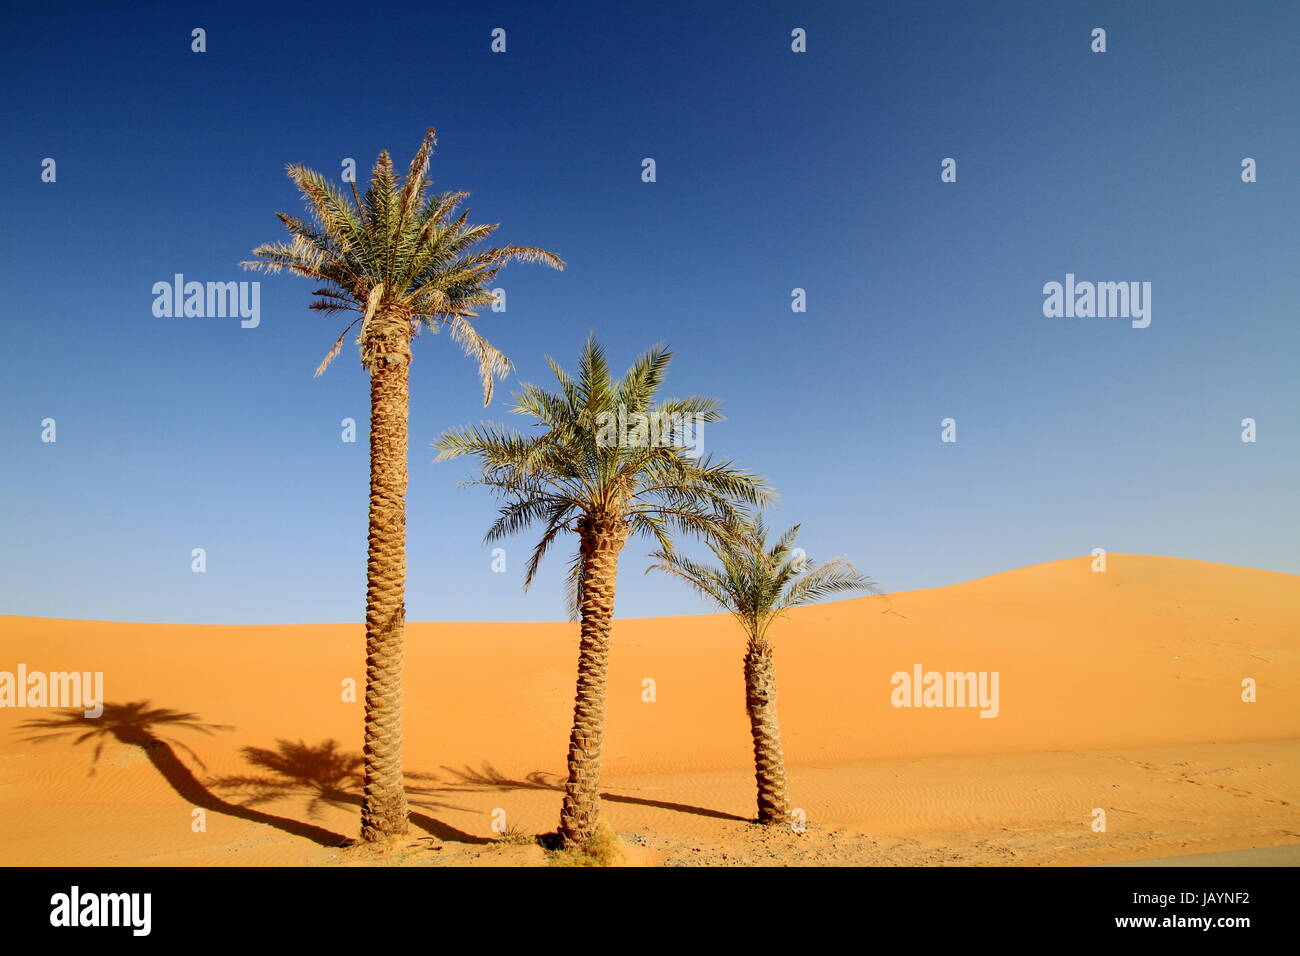 lonely palm tree in the desert Stock Photo